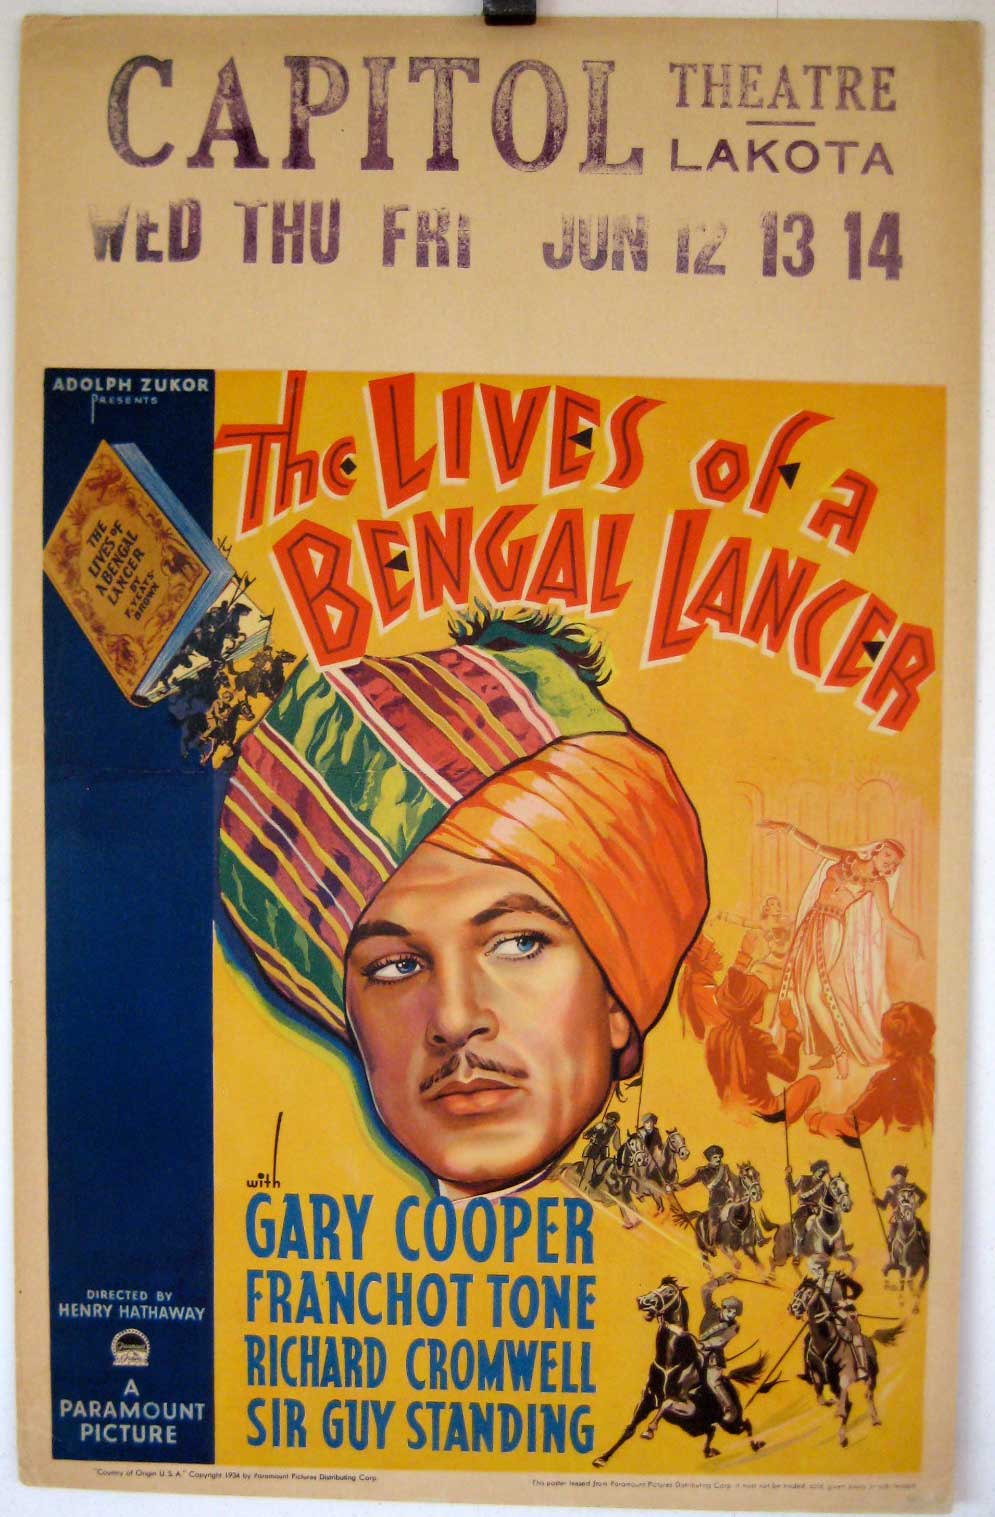 LIVES OF A BENGAL LANCER, THE